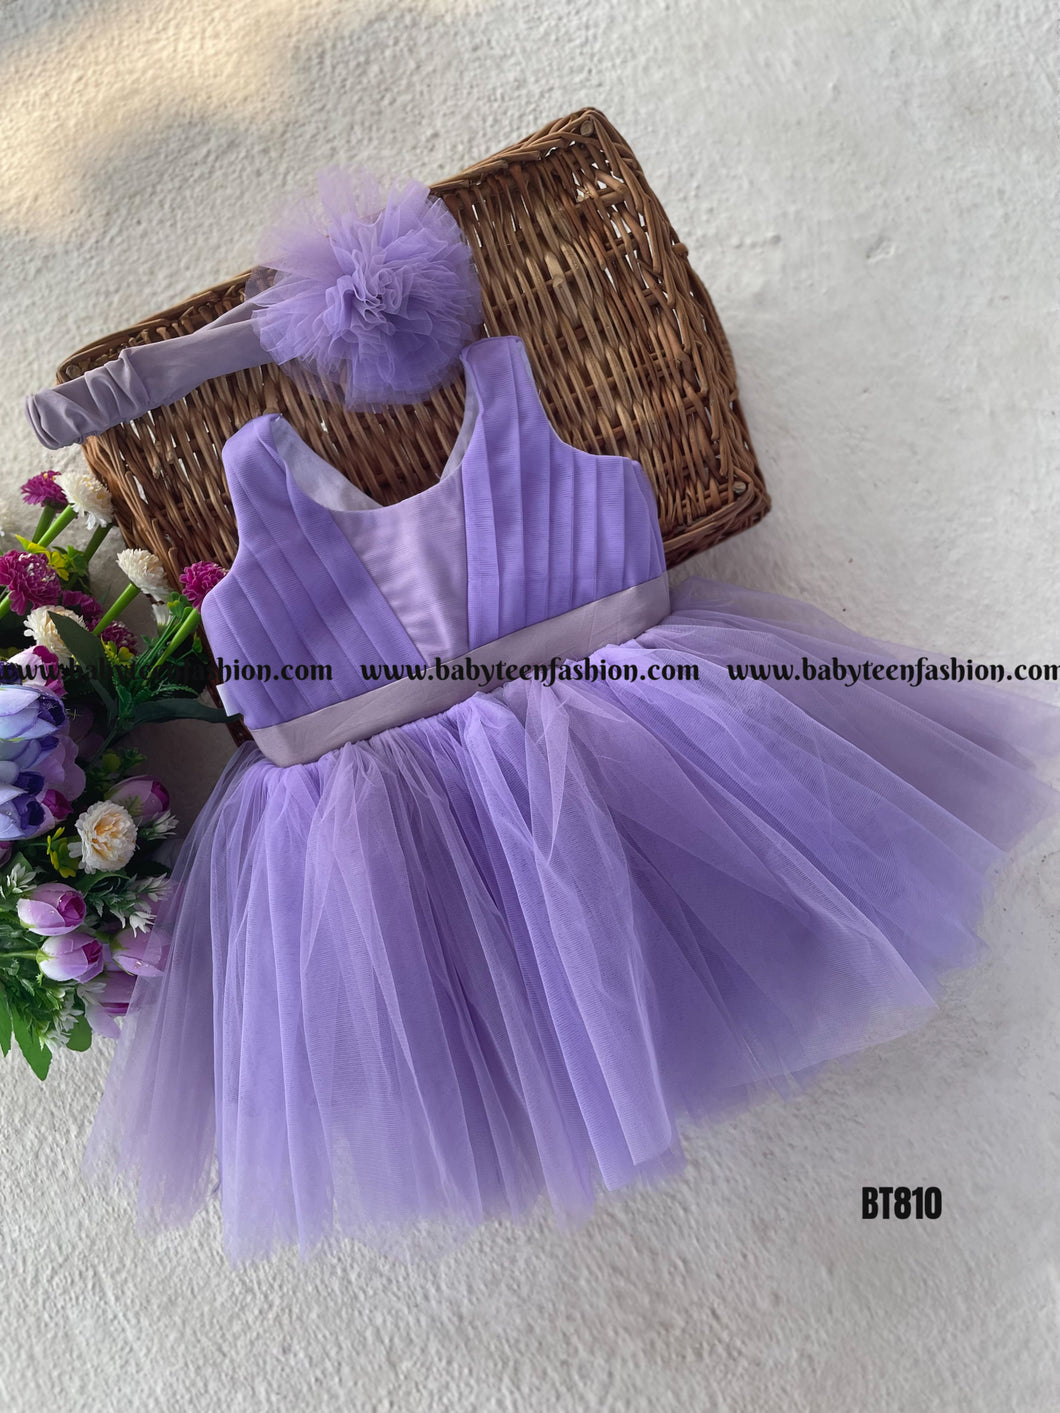 BT810 Lavender Dream Dress - A Whisk of Purple Perfection!